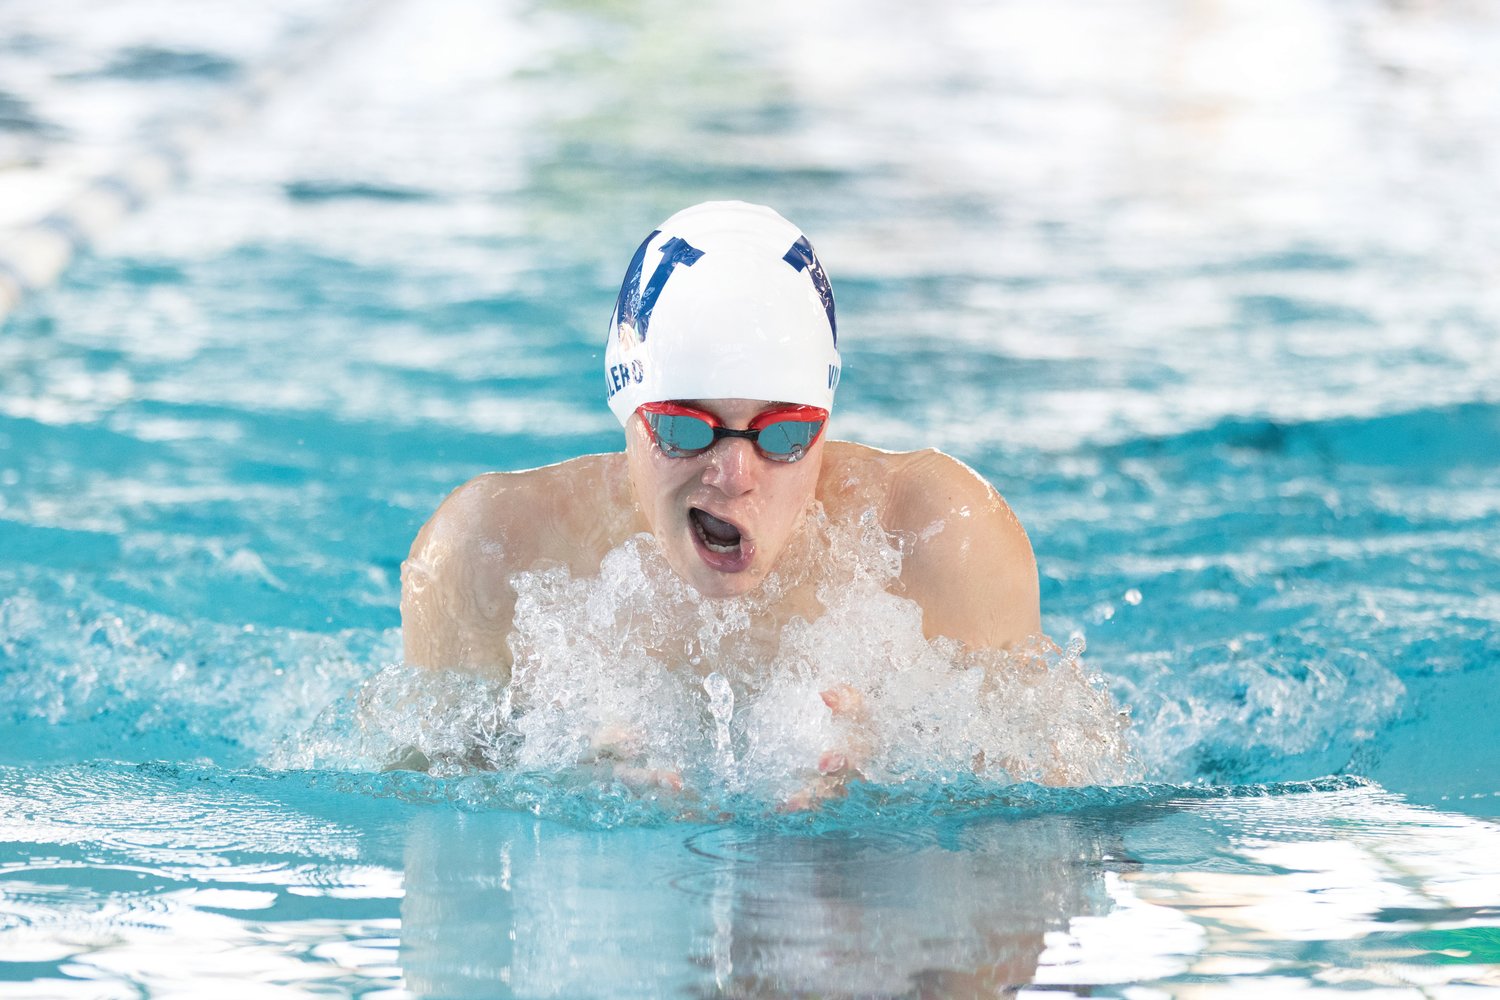 Parker Valero mid-stroke during competition earlier in the season.